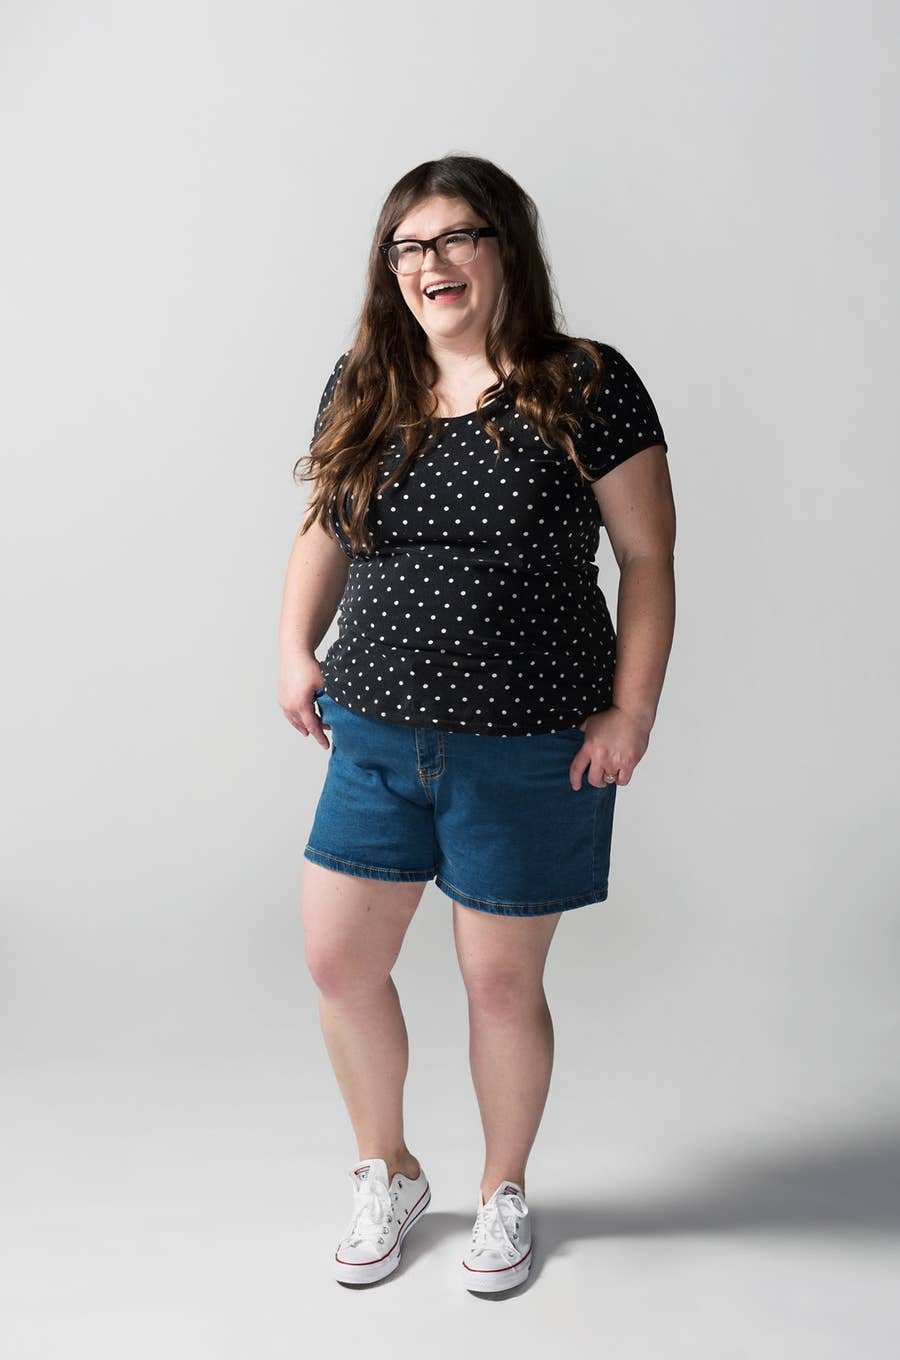 7 Plus Size Fashion Rules I Have Broken With A Vengeance All My